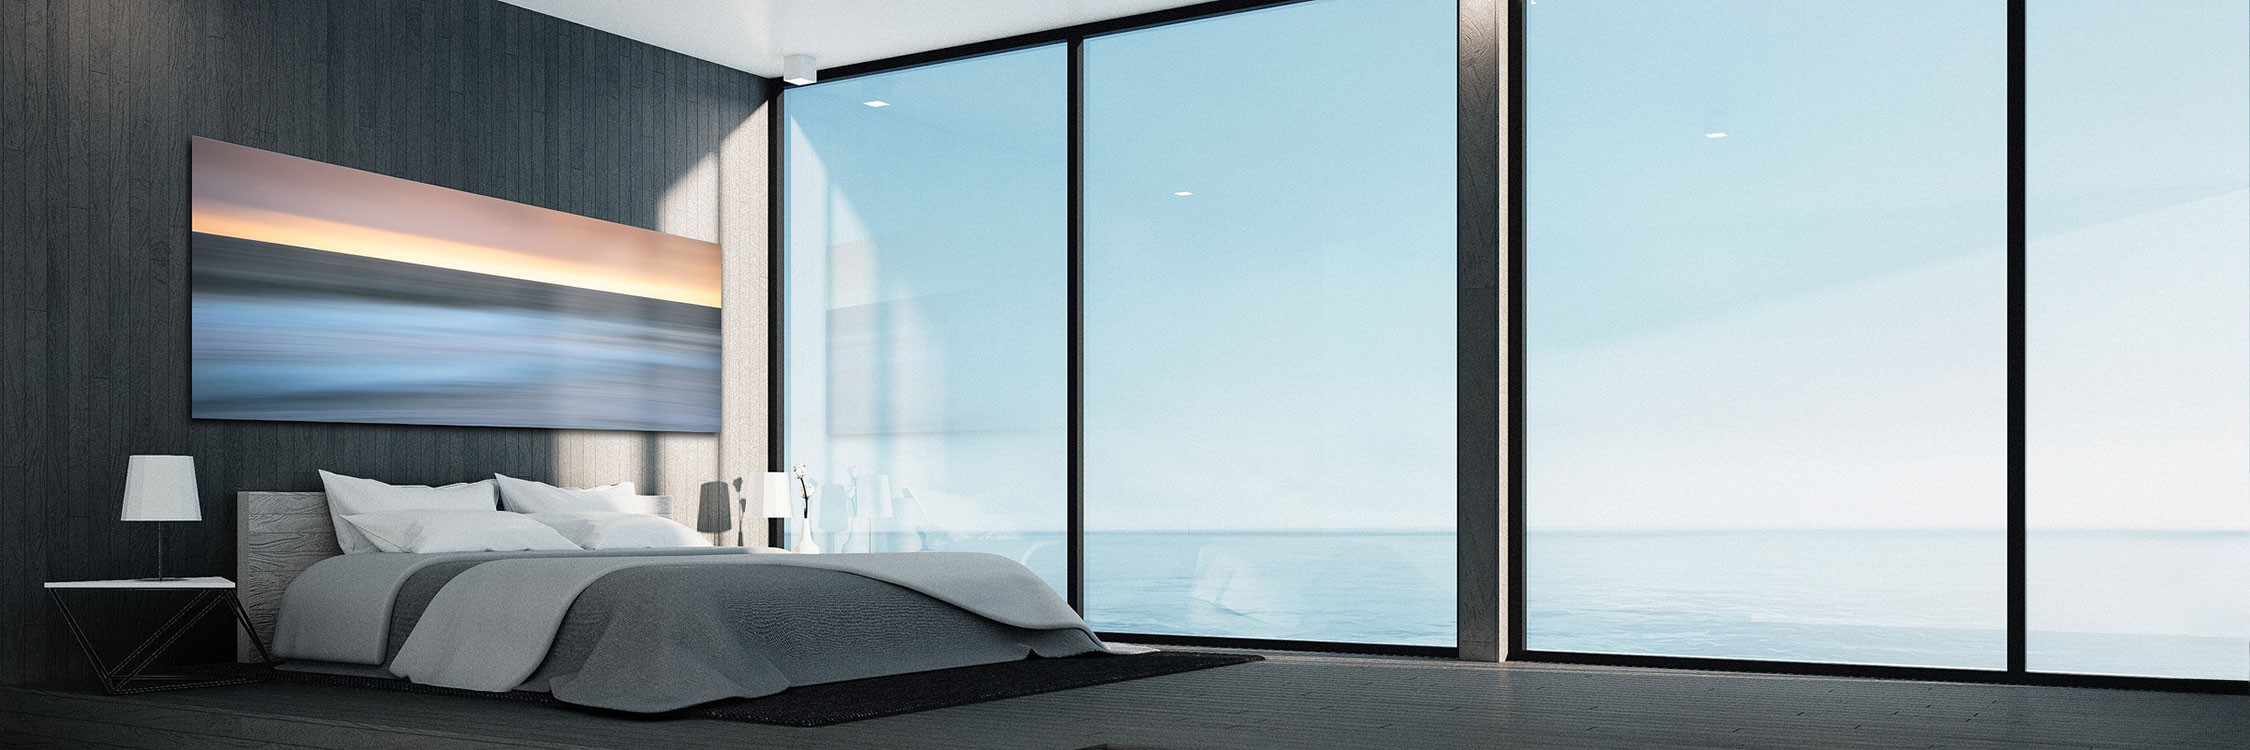 Luxury wall art panoramic print of an abstract ocean hanging above the bed in a master bedroom with a glass wall of an ocean view - Gintchin Fine Art